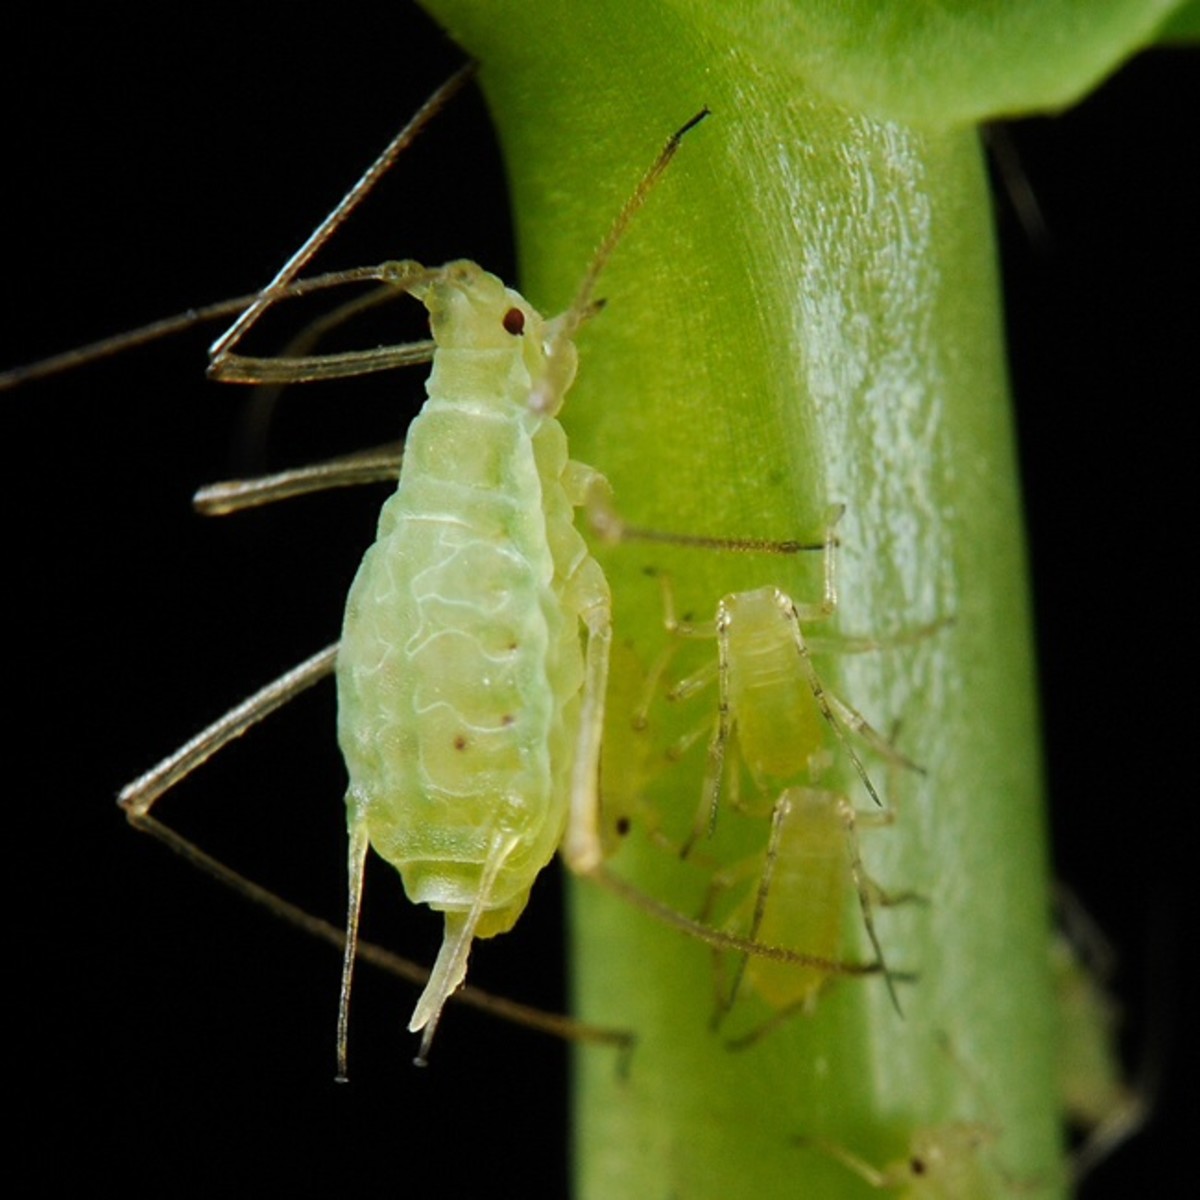 The pea aphid: adults and nymphs (immature forms of an aphid)